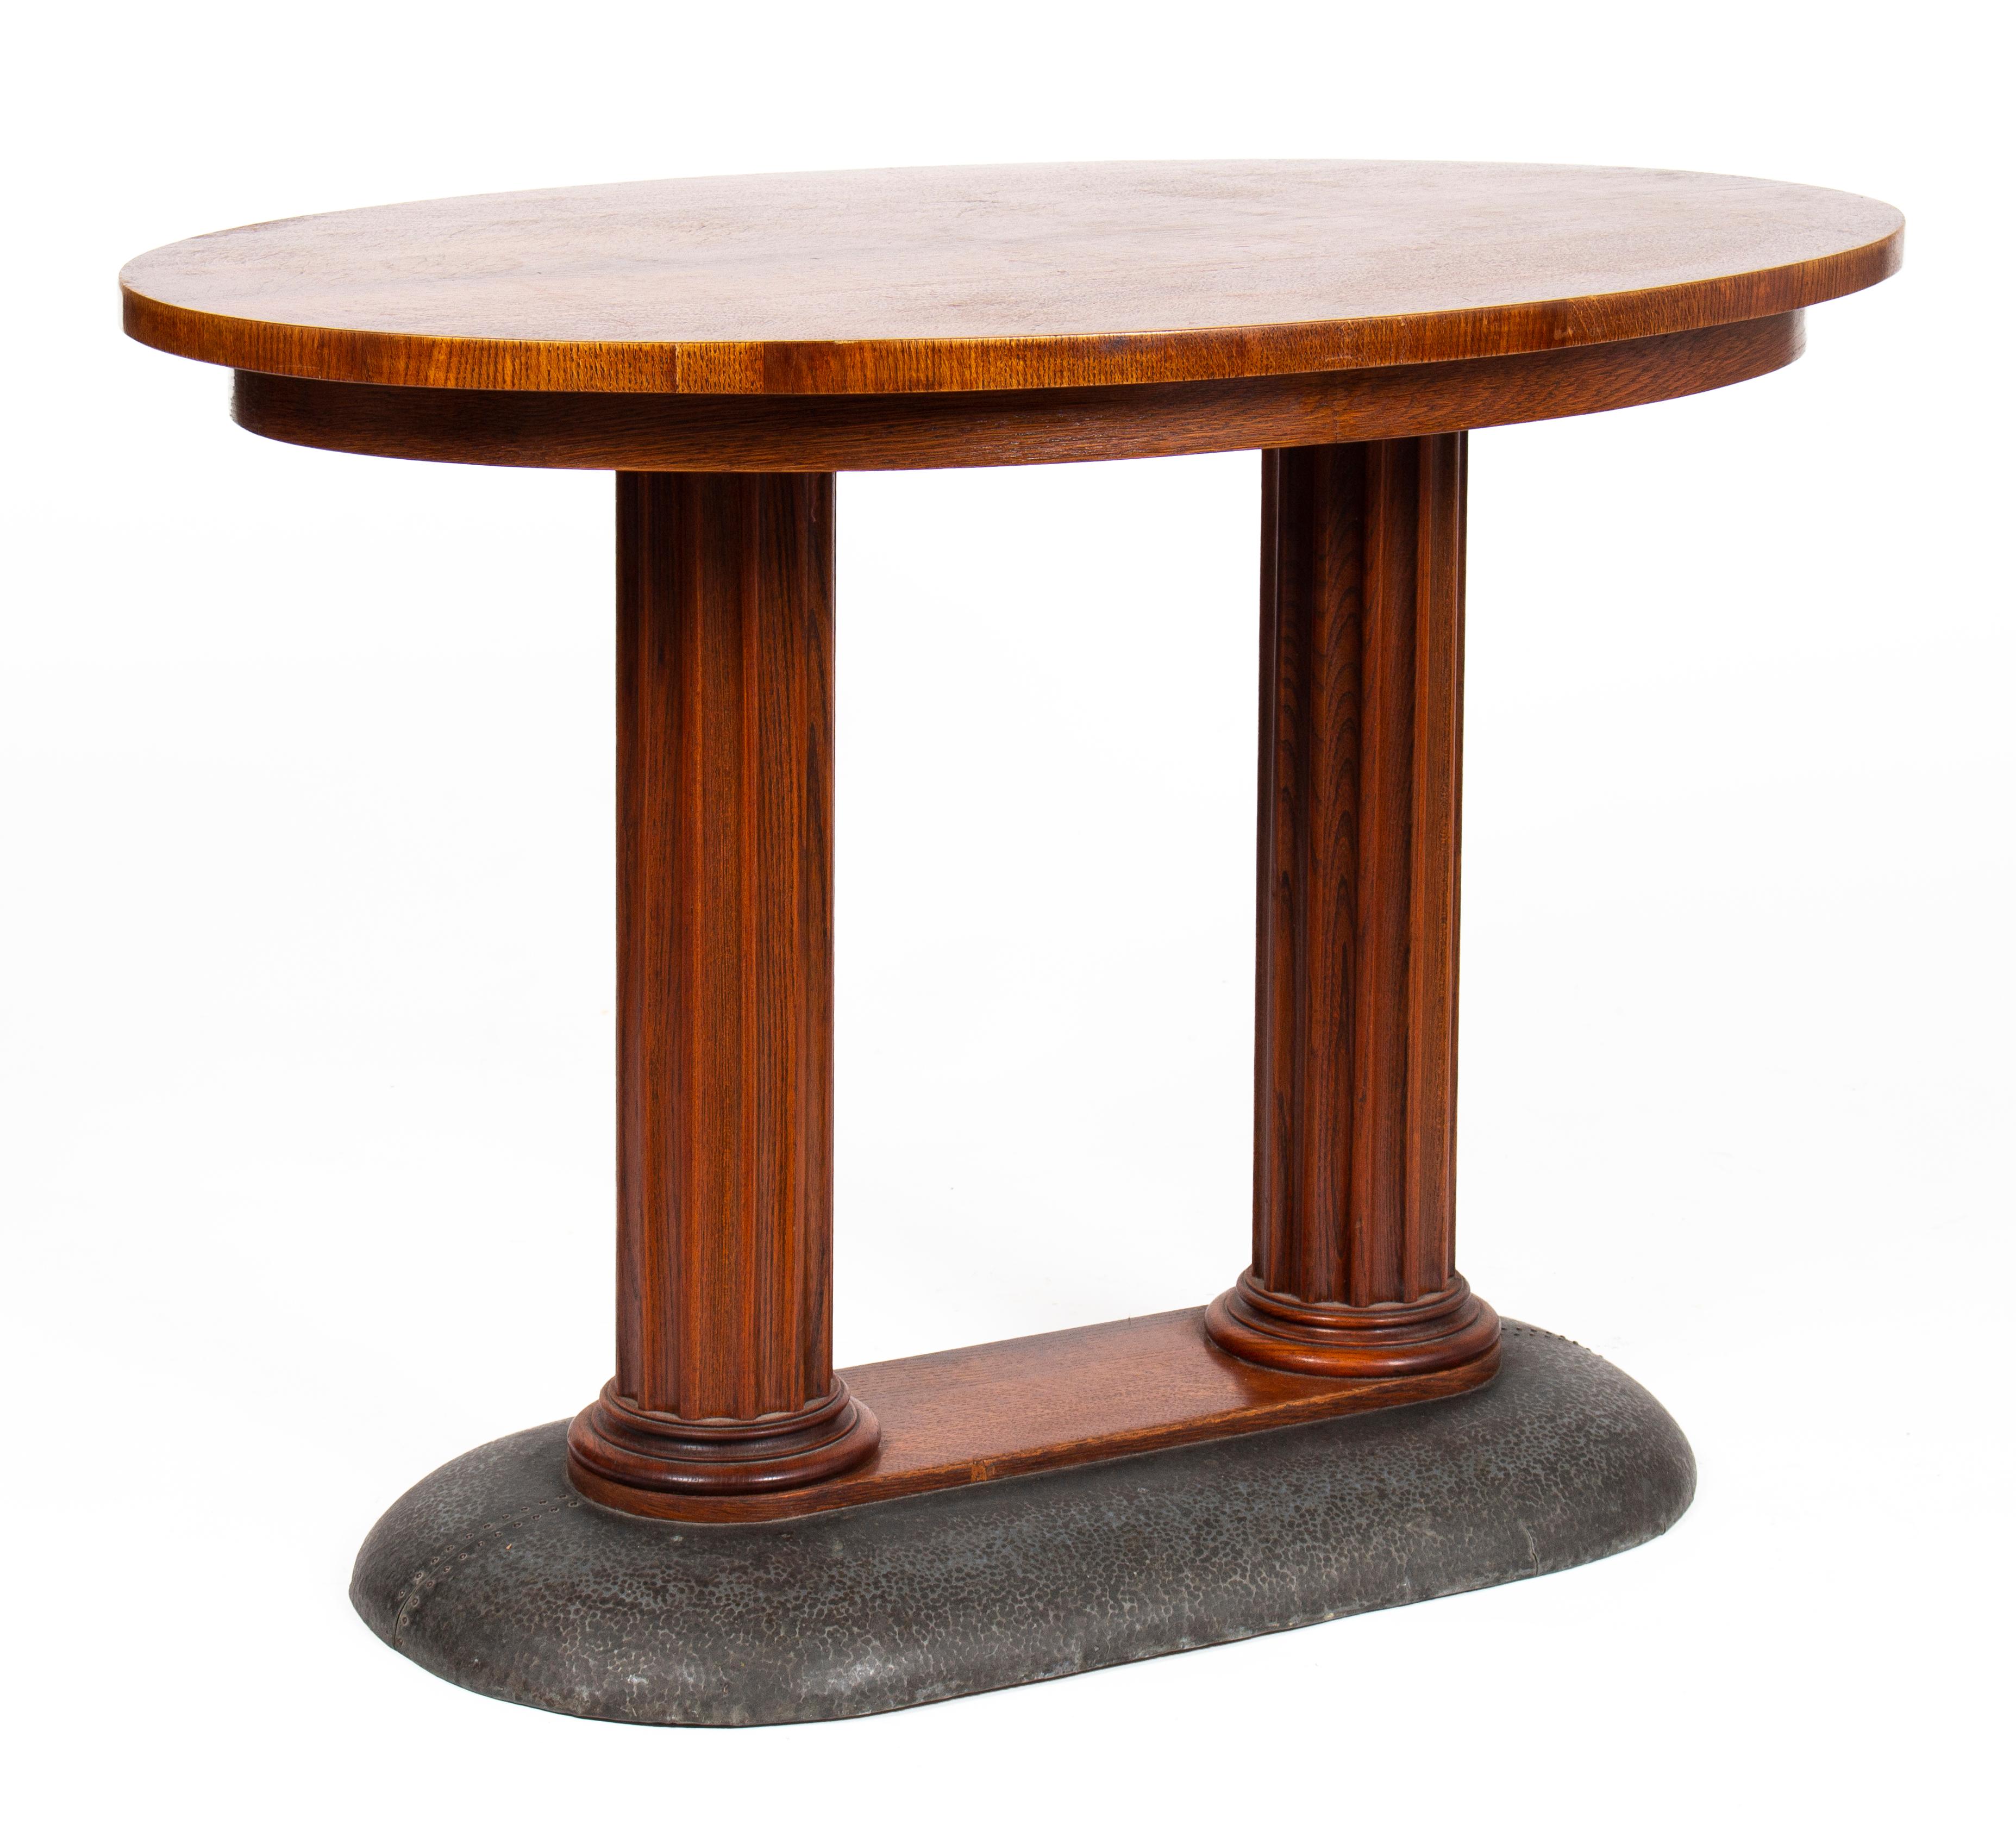 Secession center table, of elegant oval shape. Standing on two fluted columns, emerging from a solid bronze base.
The table top has a fine oak veneer surface, giving it a natural colour, complemented by the shimmer of the hammered bronze surface.
 